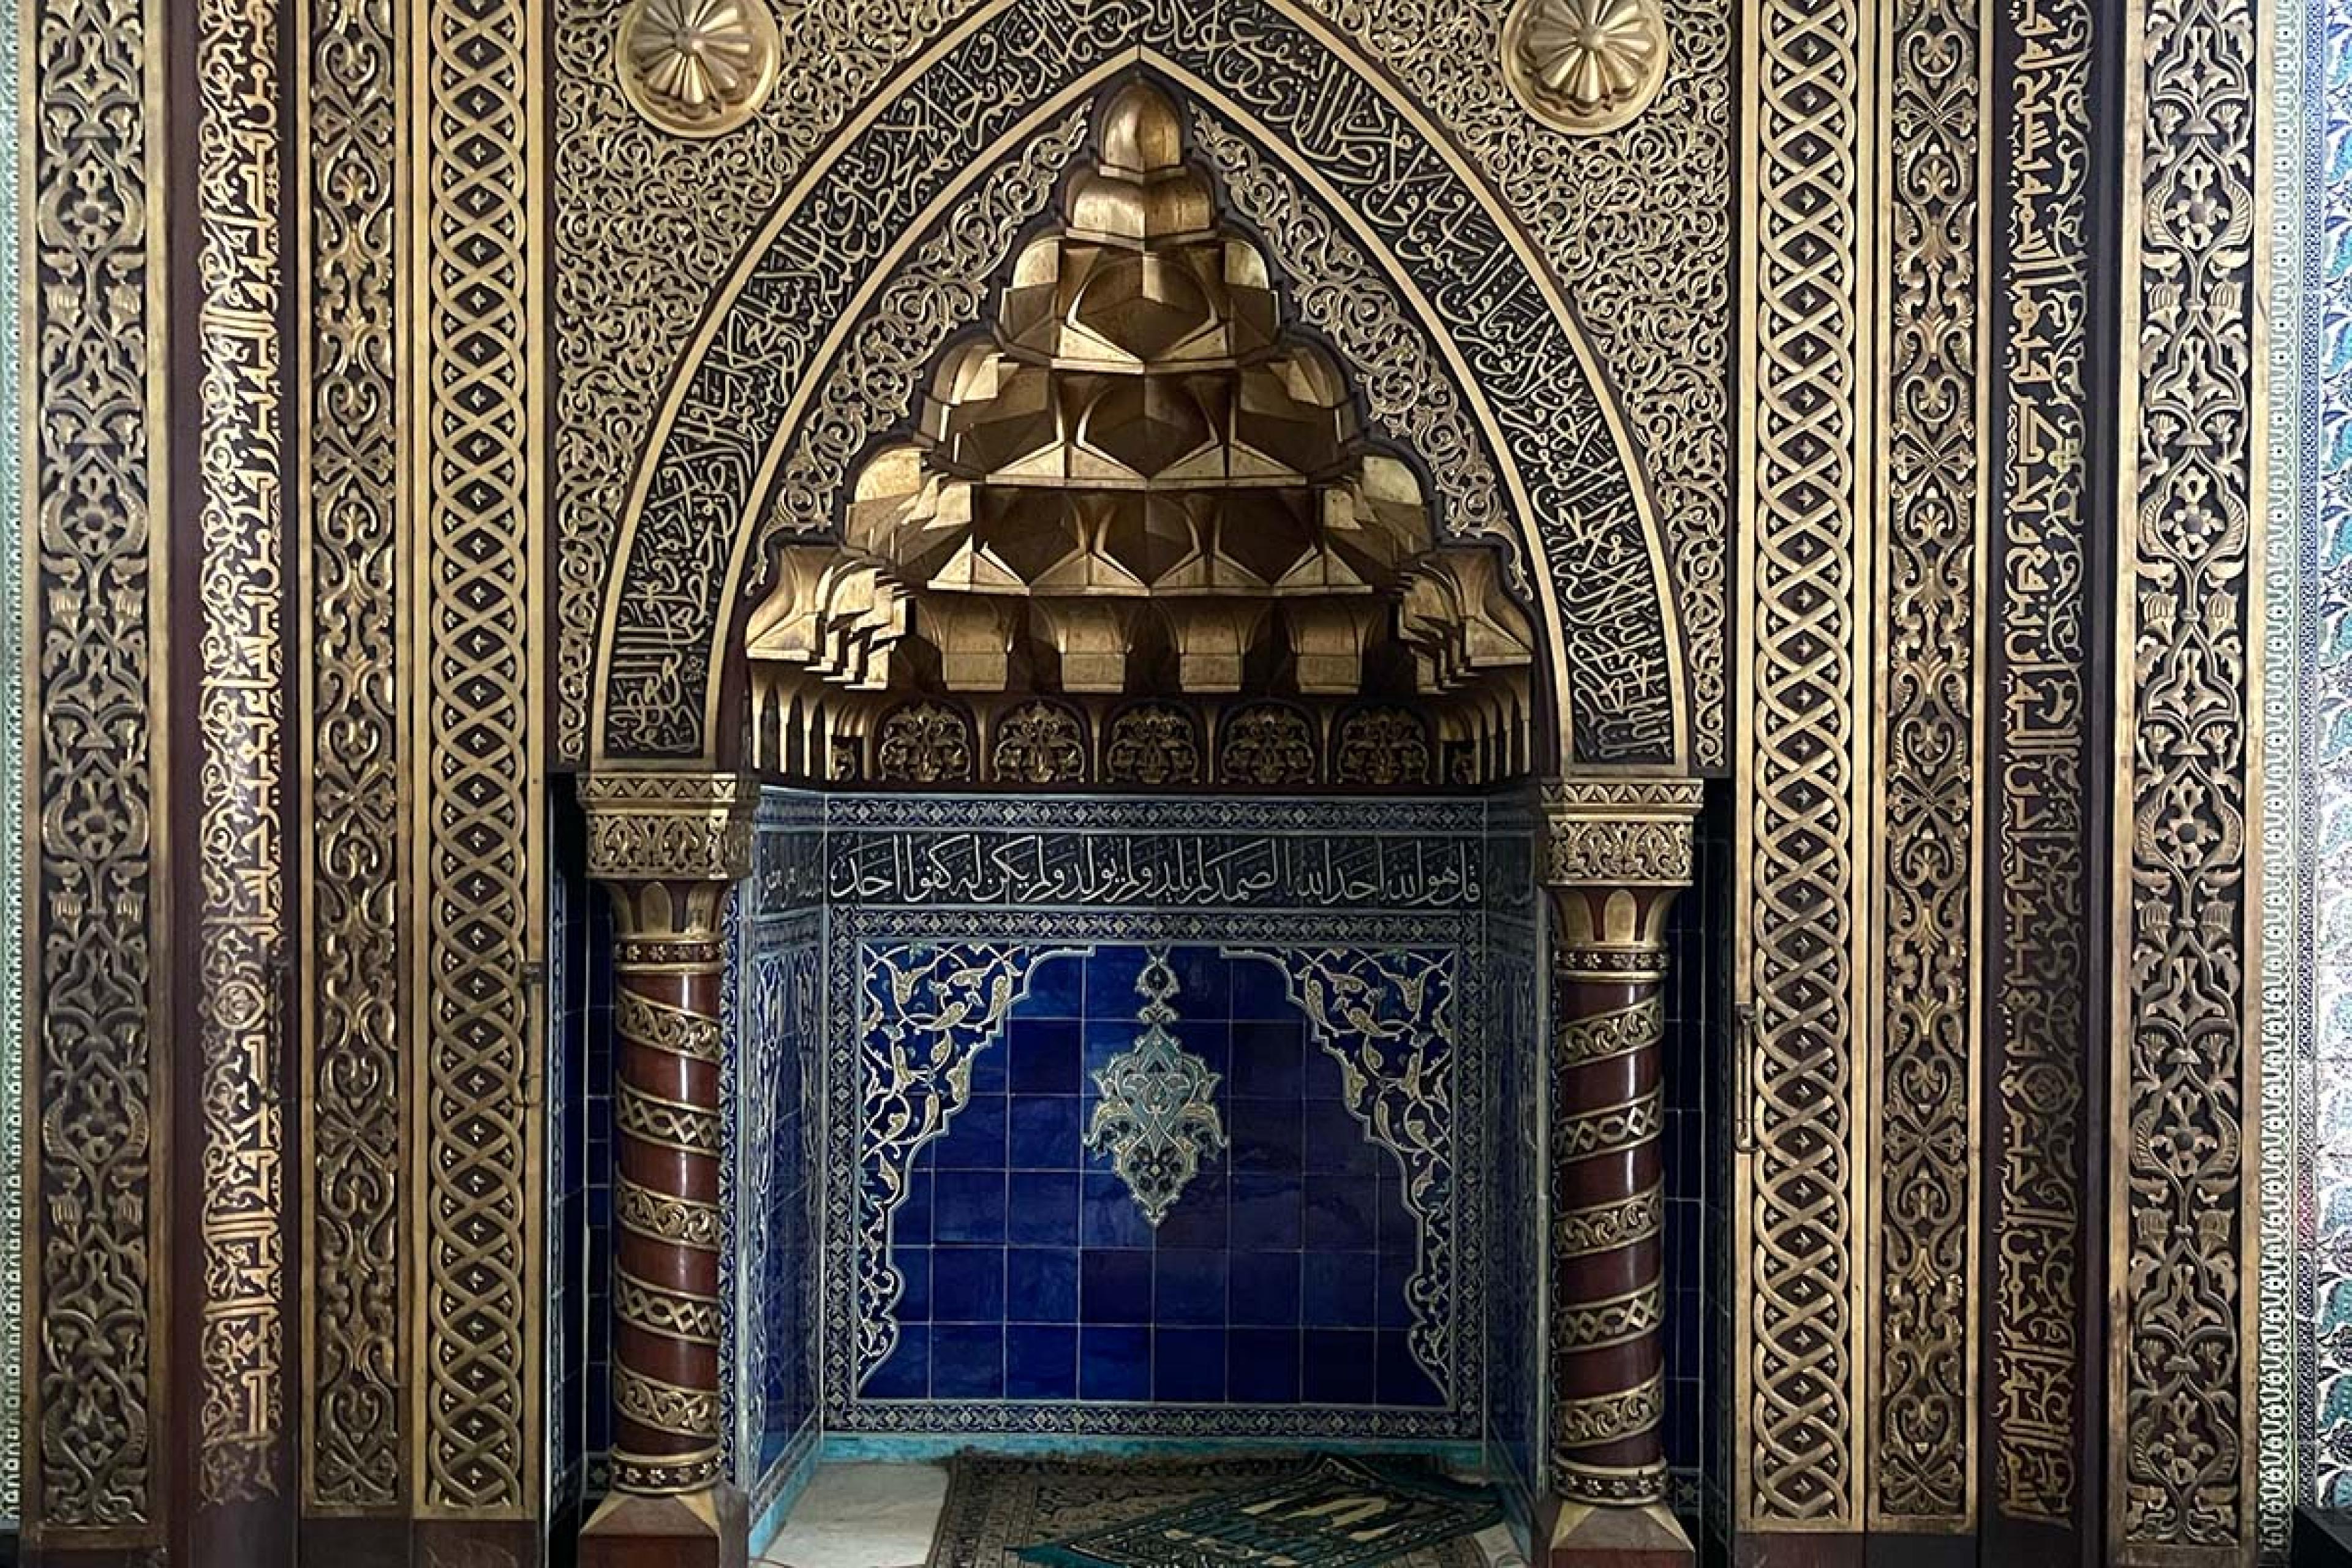 ornate golden pointed archway with blue tiles in the middle